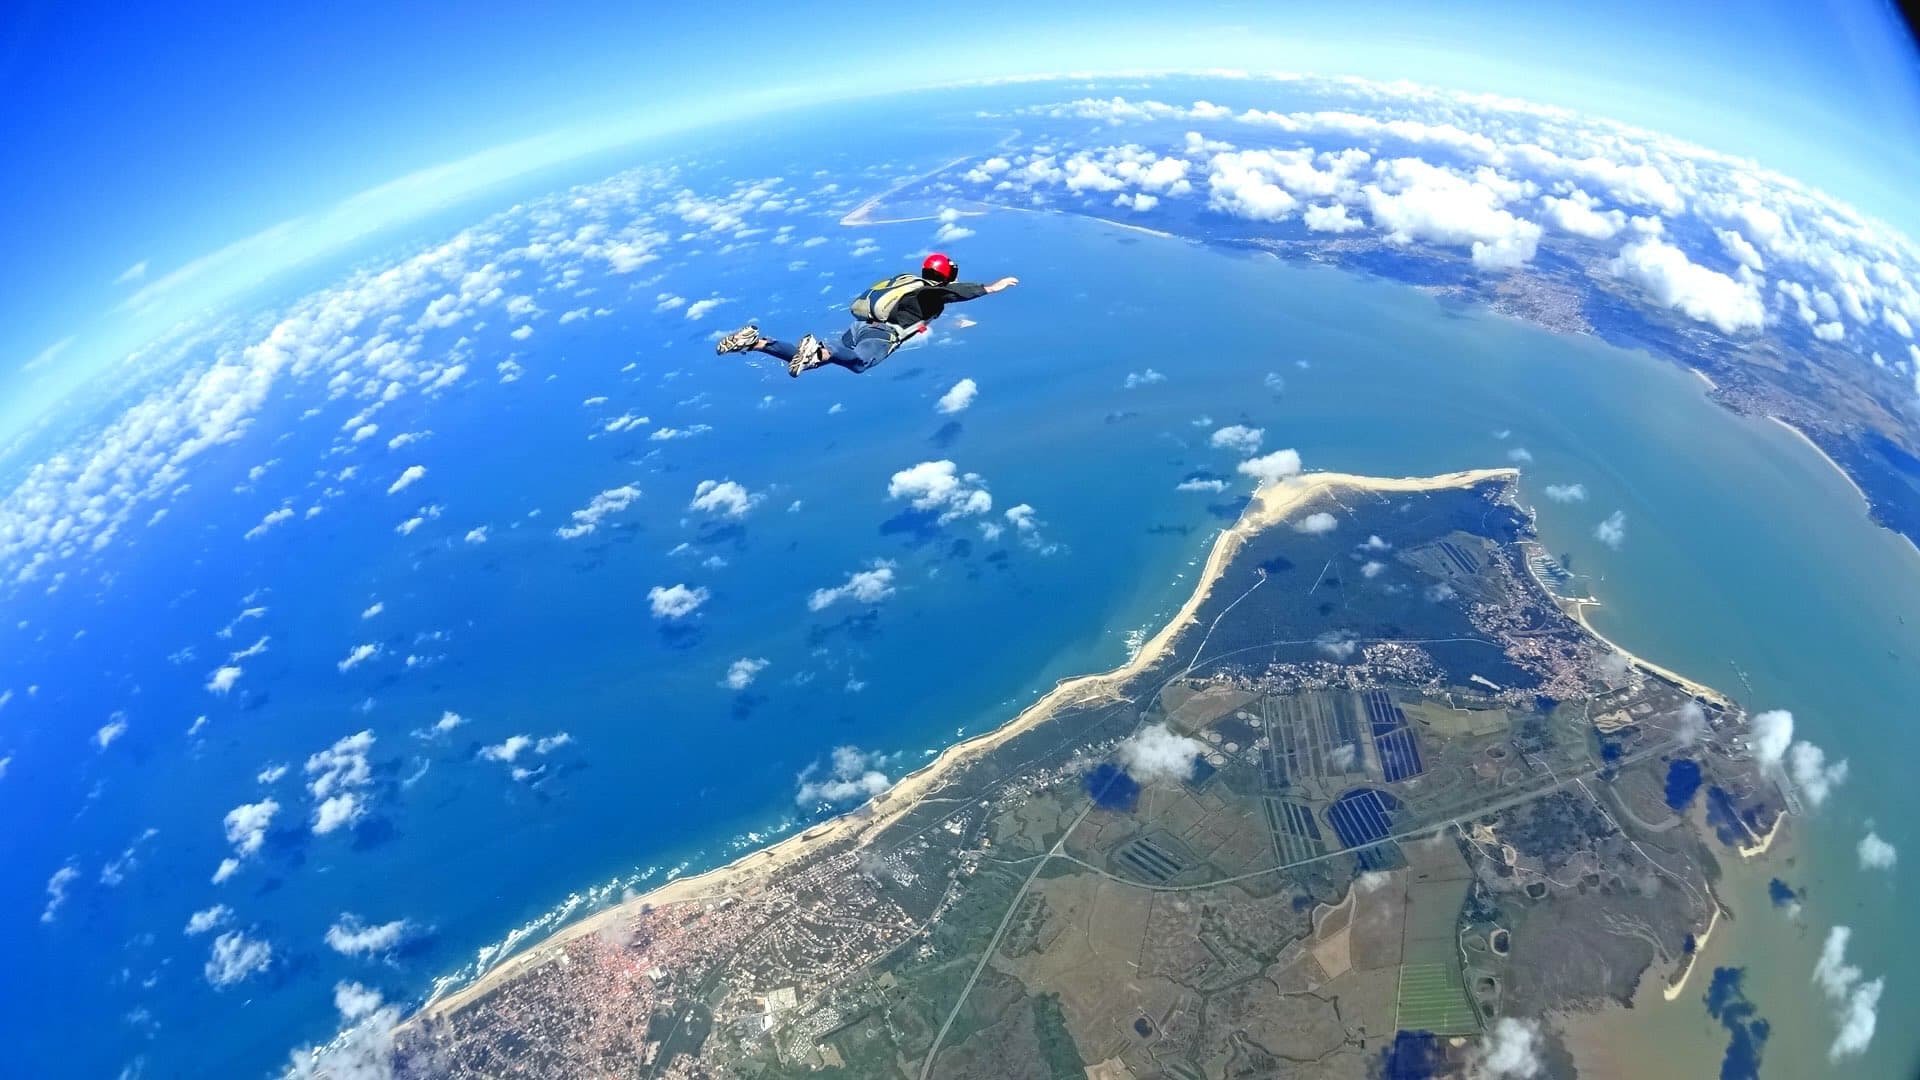 Photo of Anthony, the owner of the website, during a skydive jump with the ocean in the background